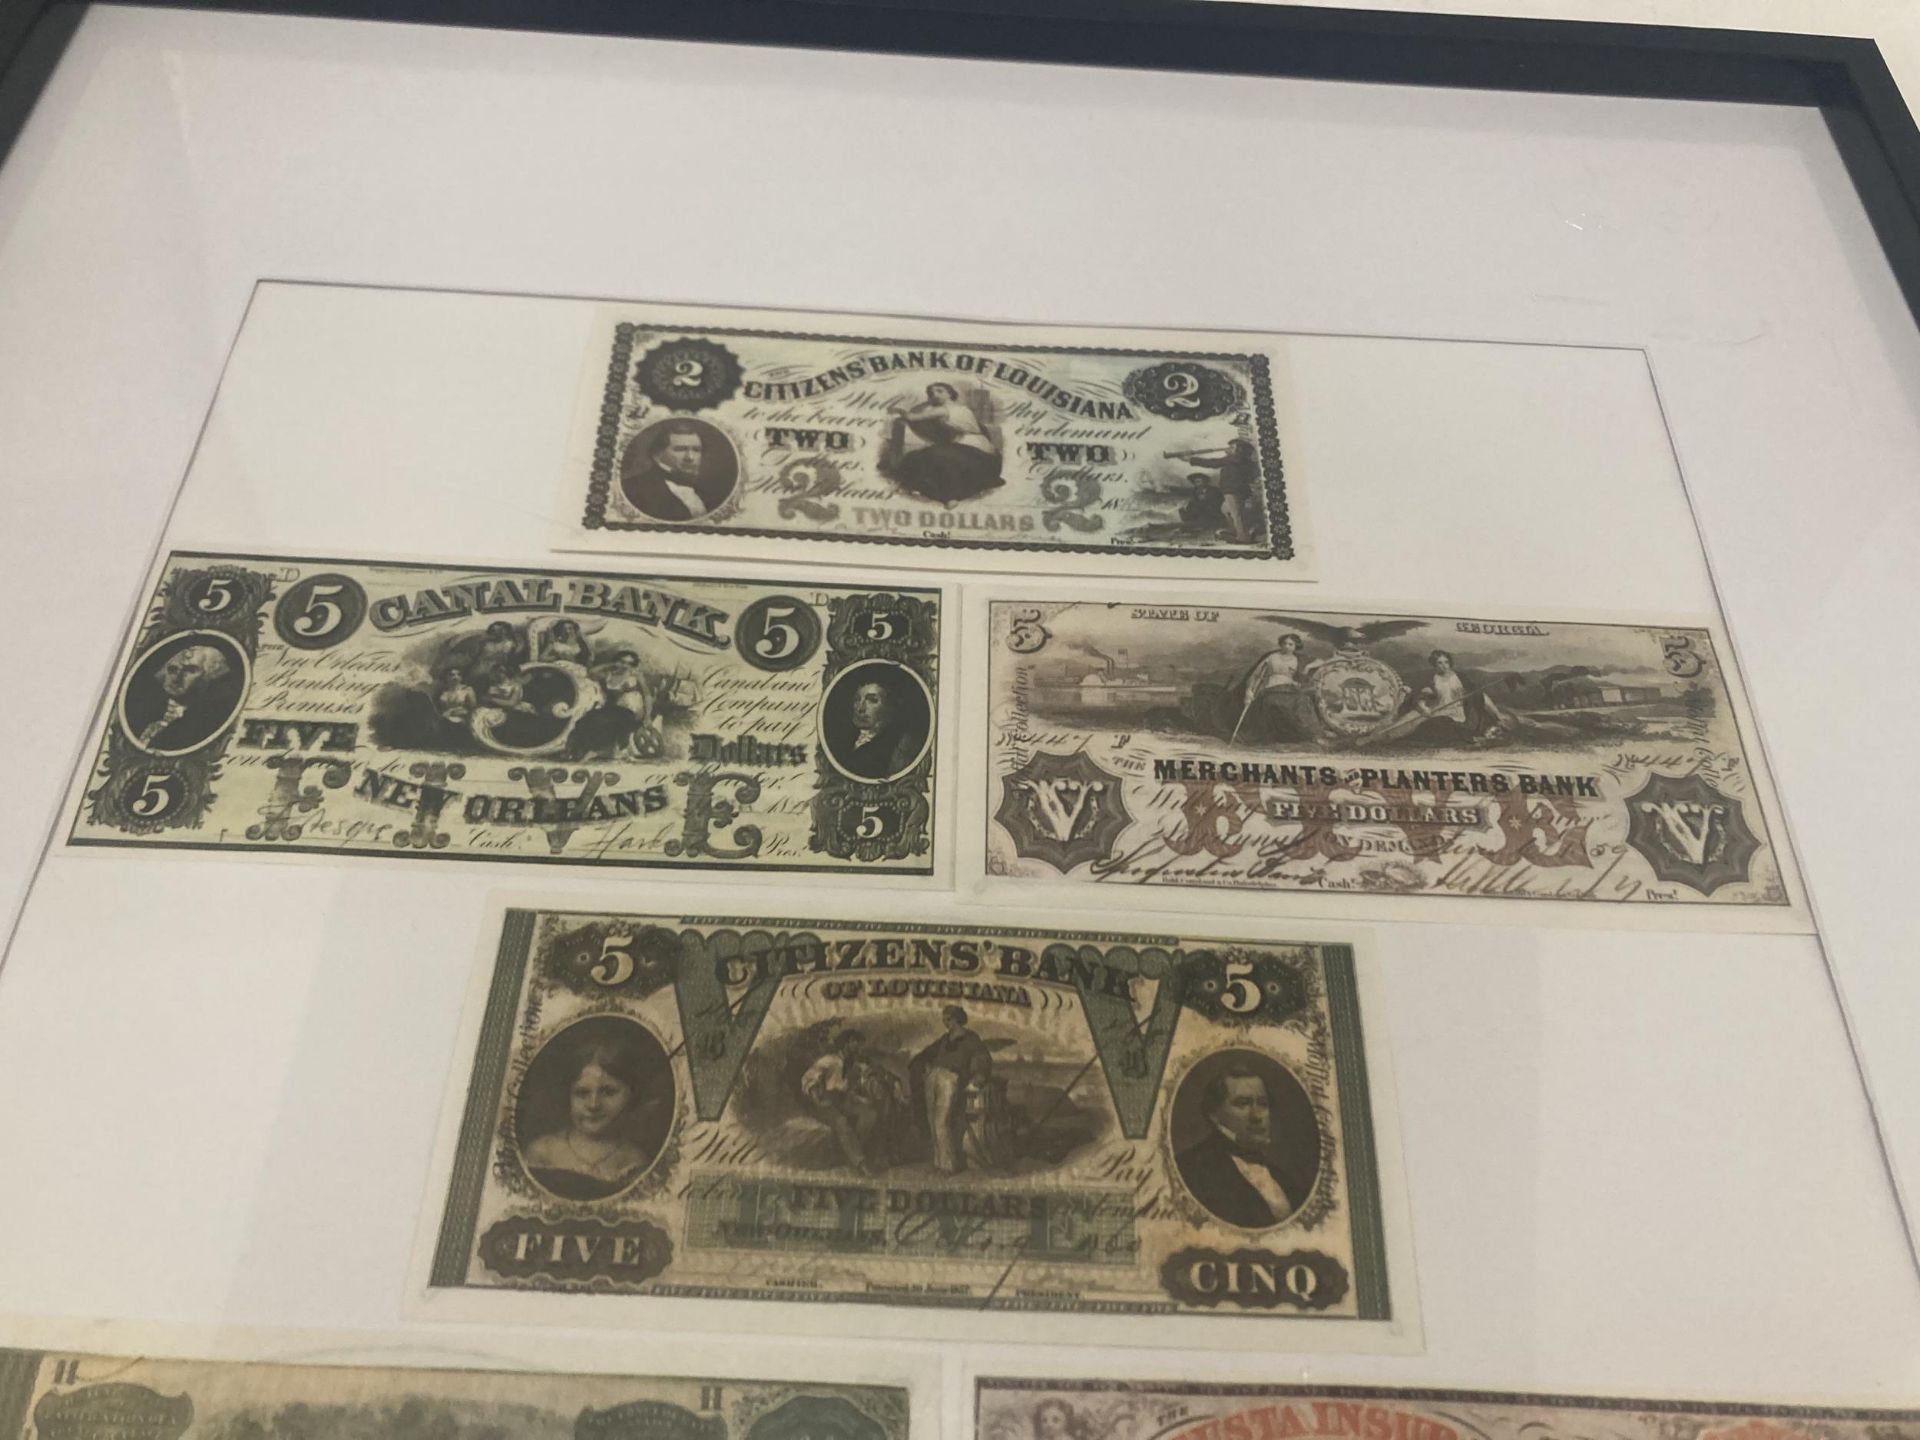 NINE COPIES OF AMERICAN BANK NOTES, FRAMED - Image 2 of 2